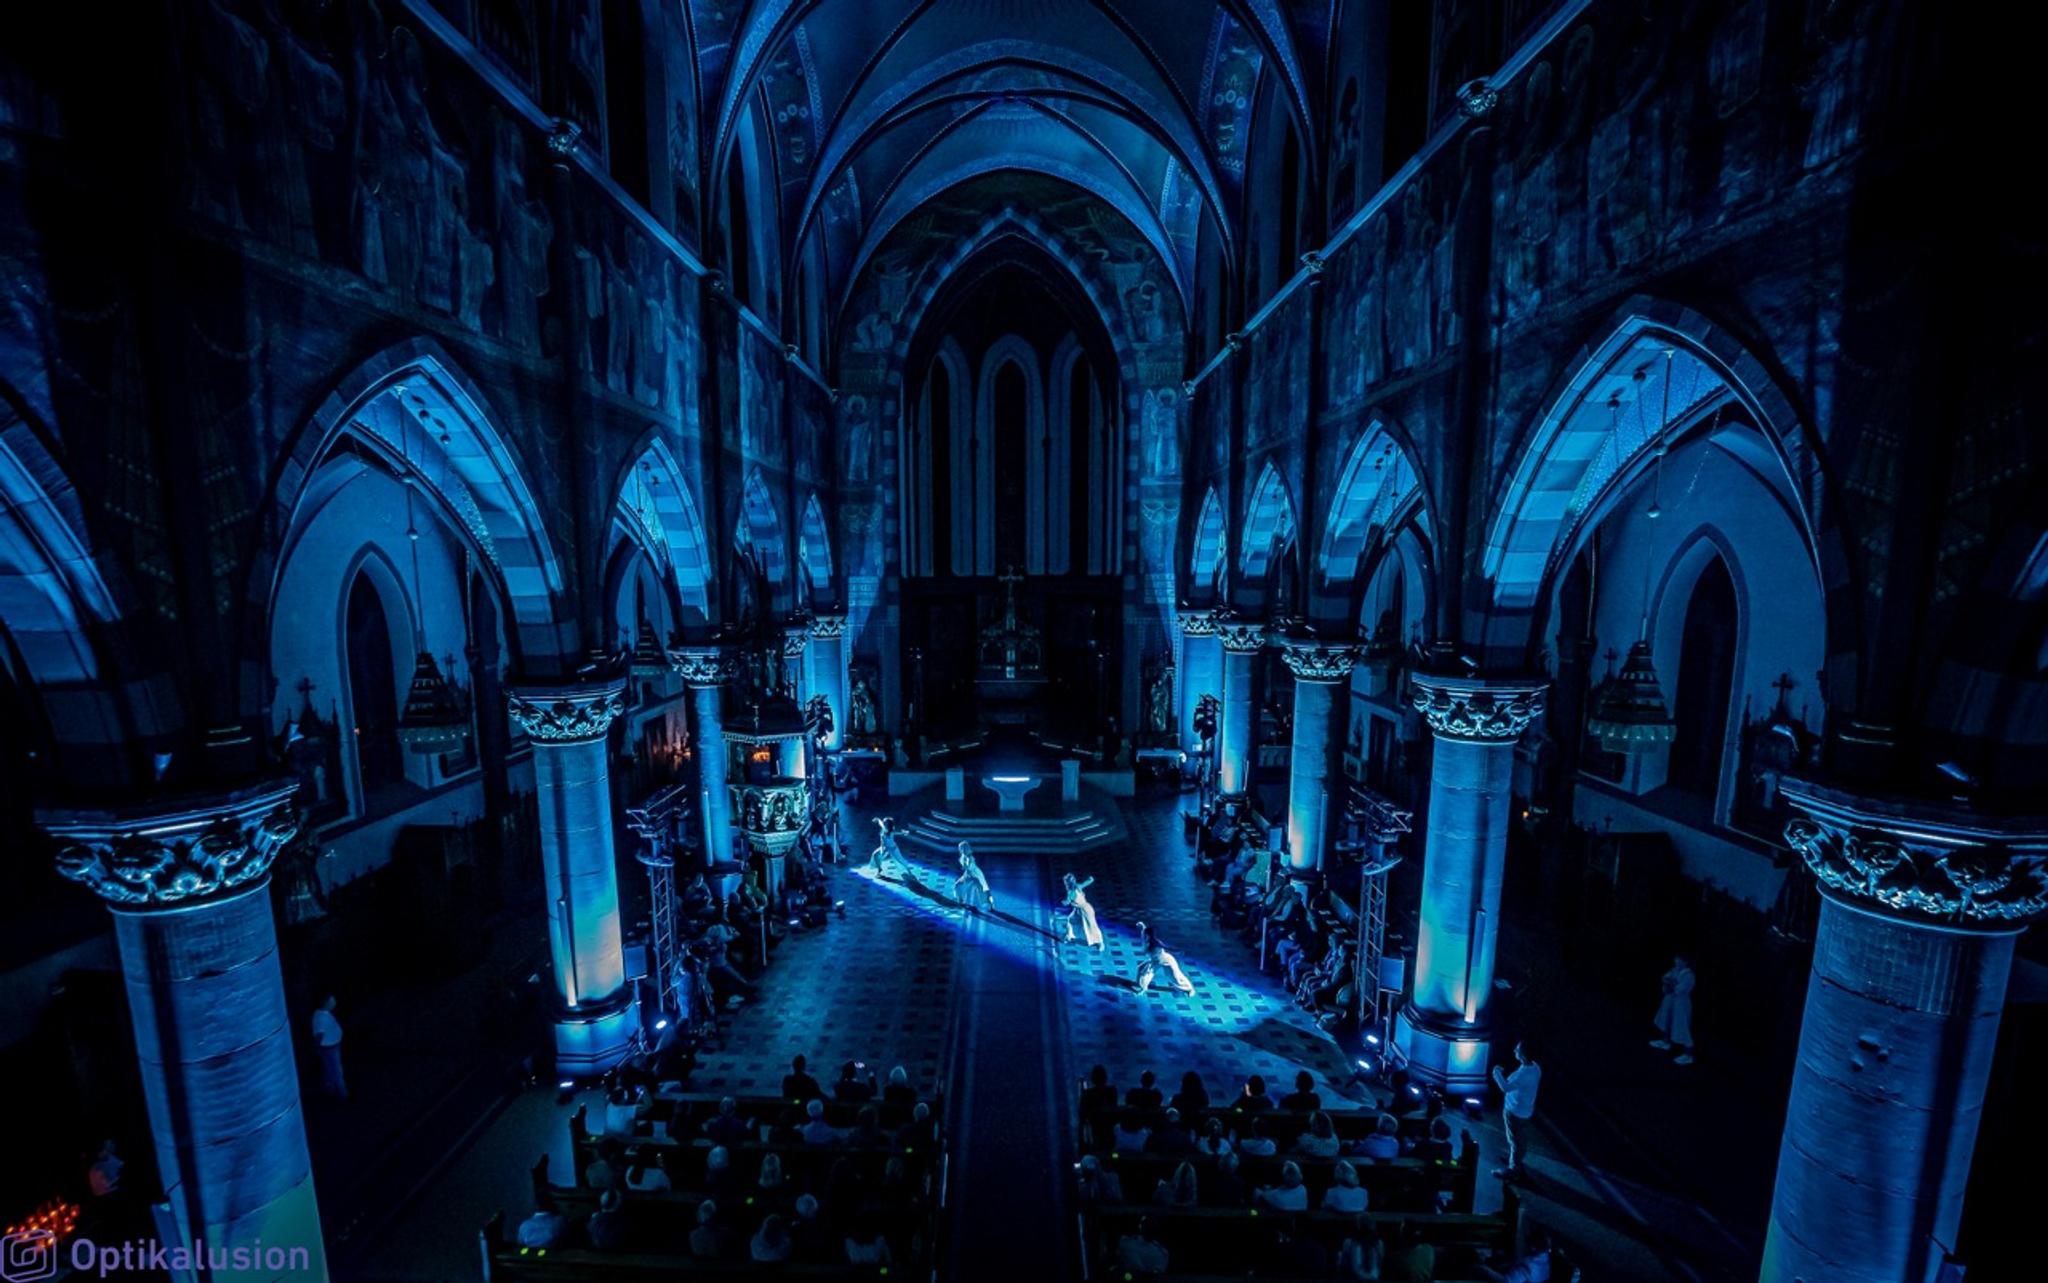 Dancers perform in a blue lit cathedral